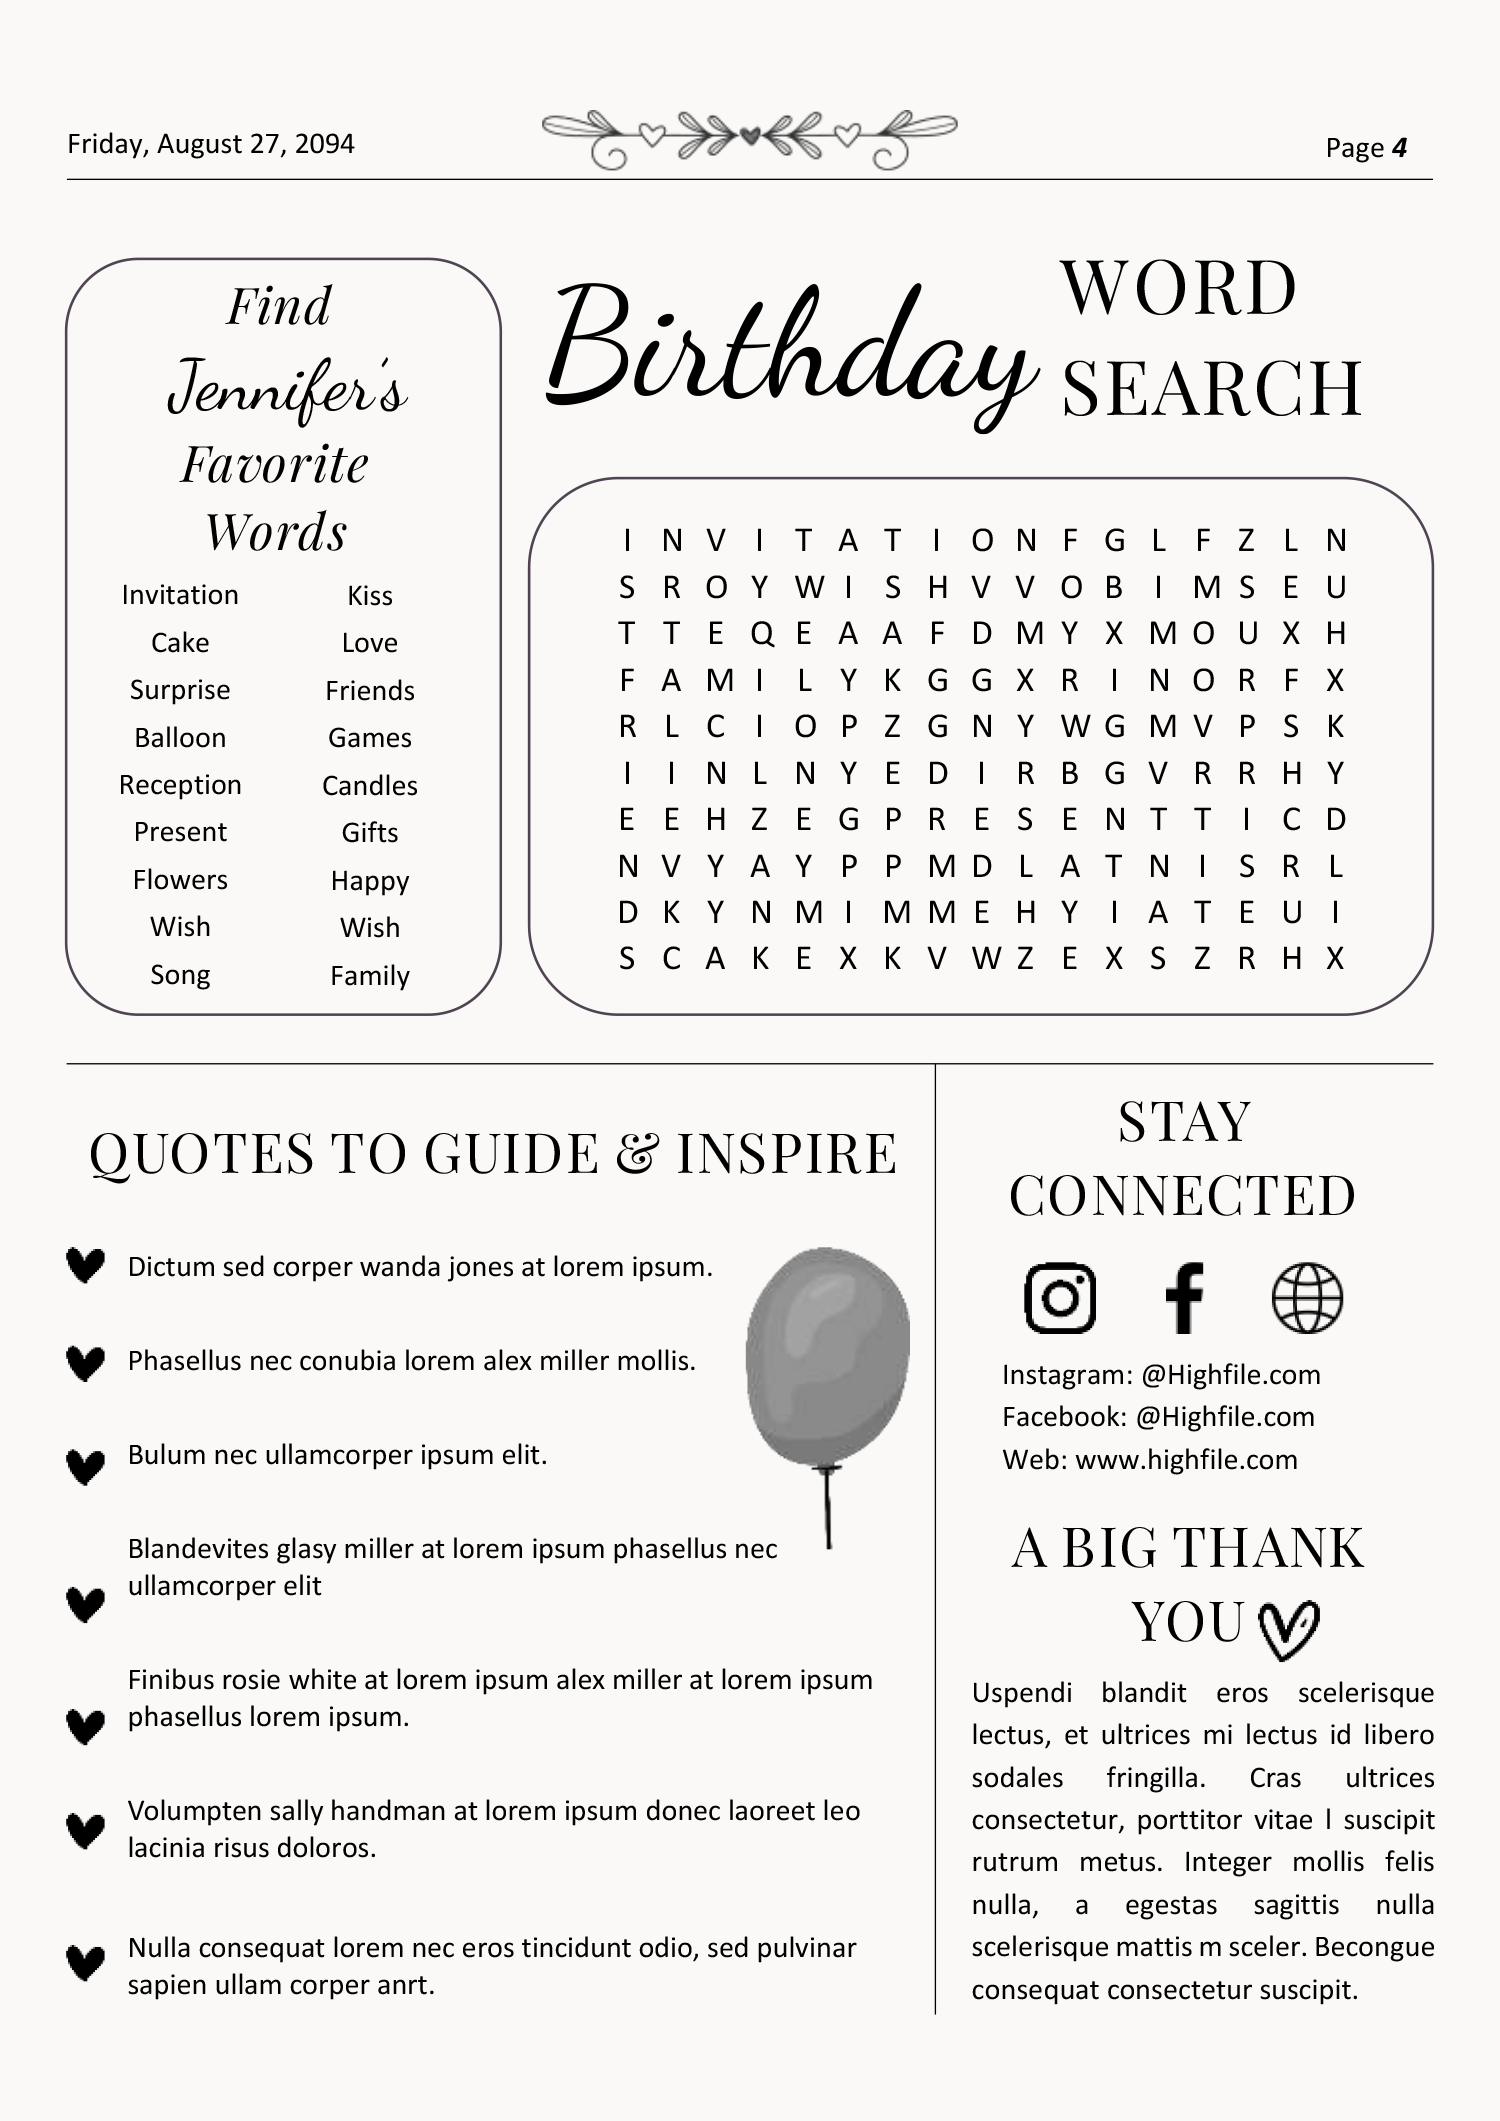 Black and White Birthday Newspaper Template - Page 04